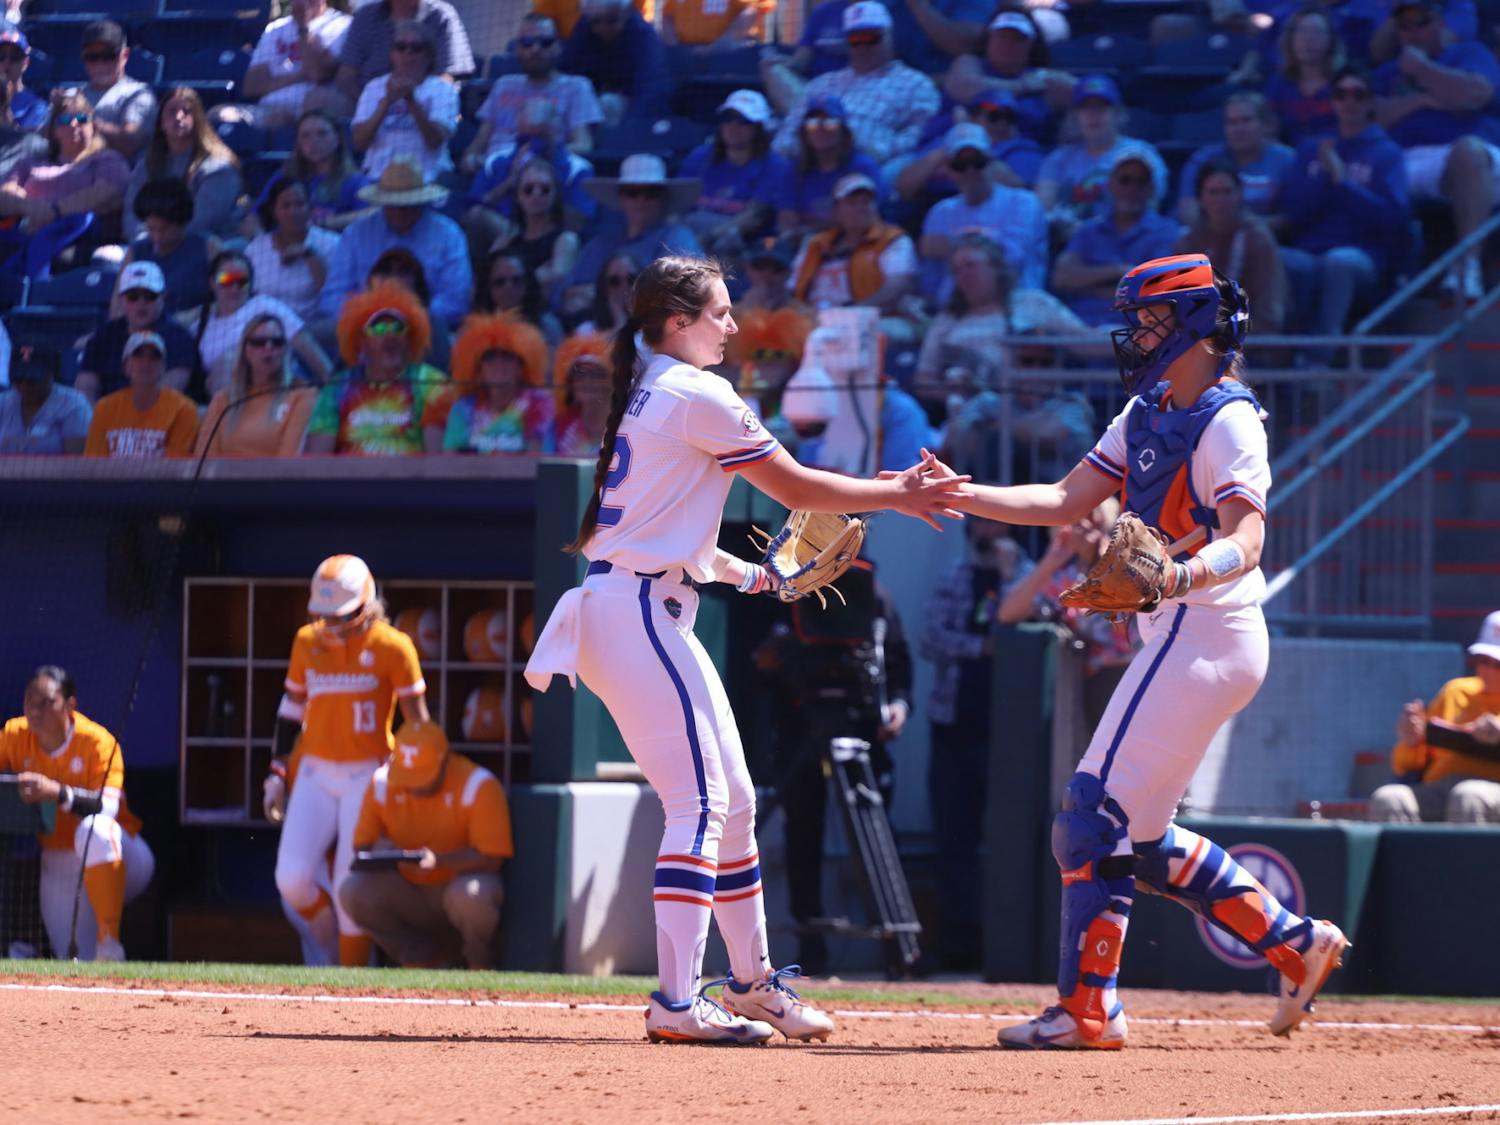 Senior Elizabeth Hightower, catcher Sam Roe and the No. 7 Florida Gators stole the series from the No. 17 Auburn Tigers Sunday